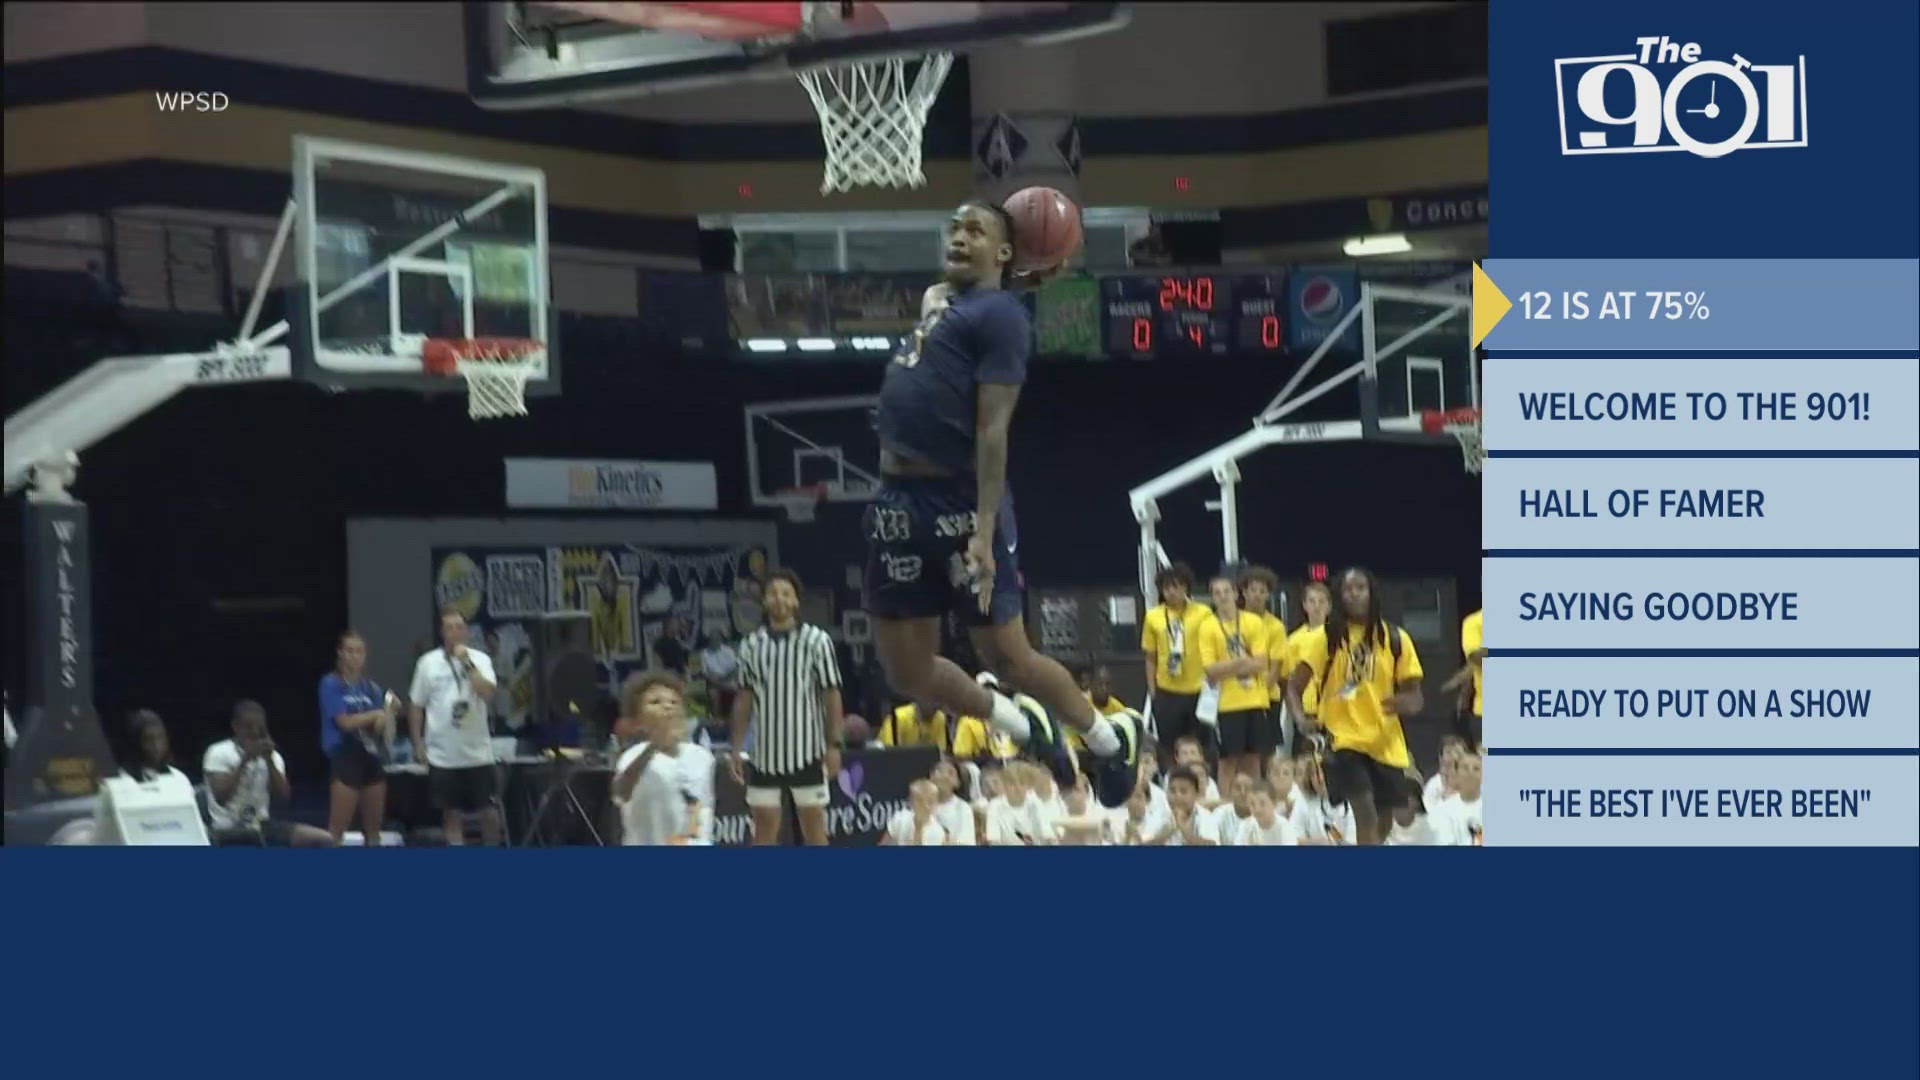 NBA superstar Ja Morant returned to his alma mater to host a free youth basketball camp and to for his induction into the Racer hall of fame.